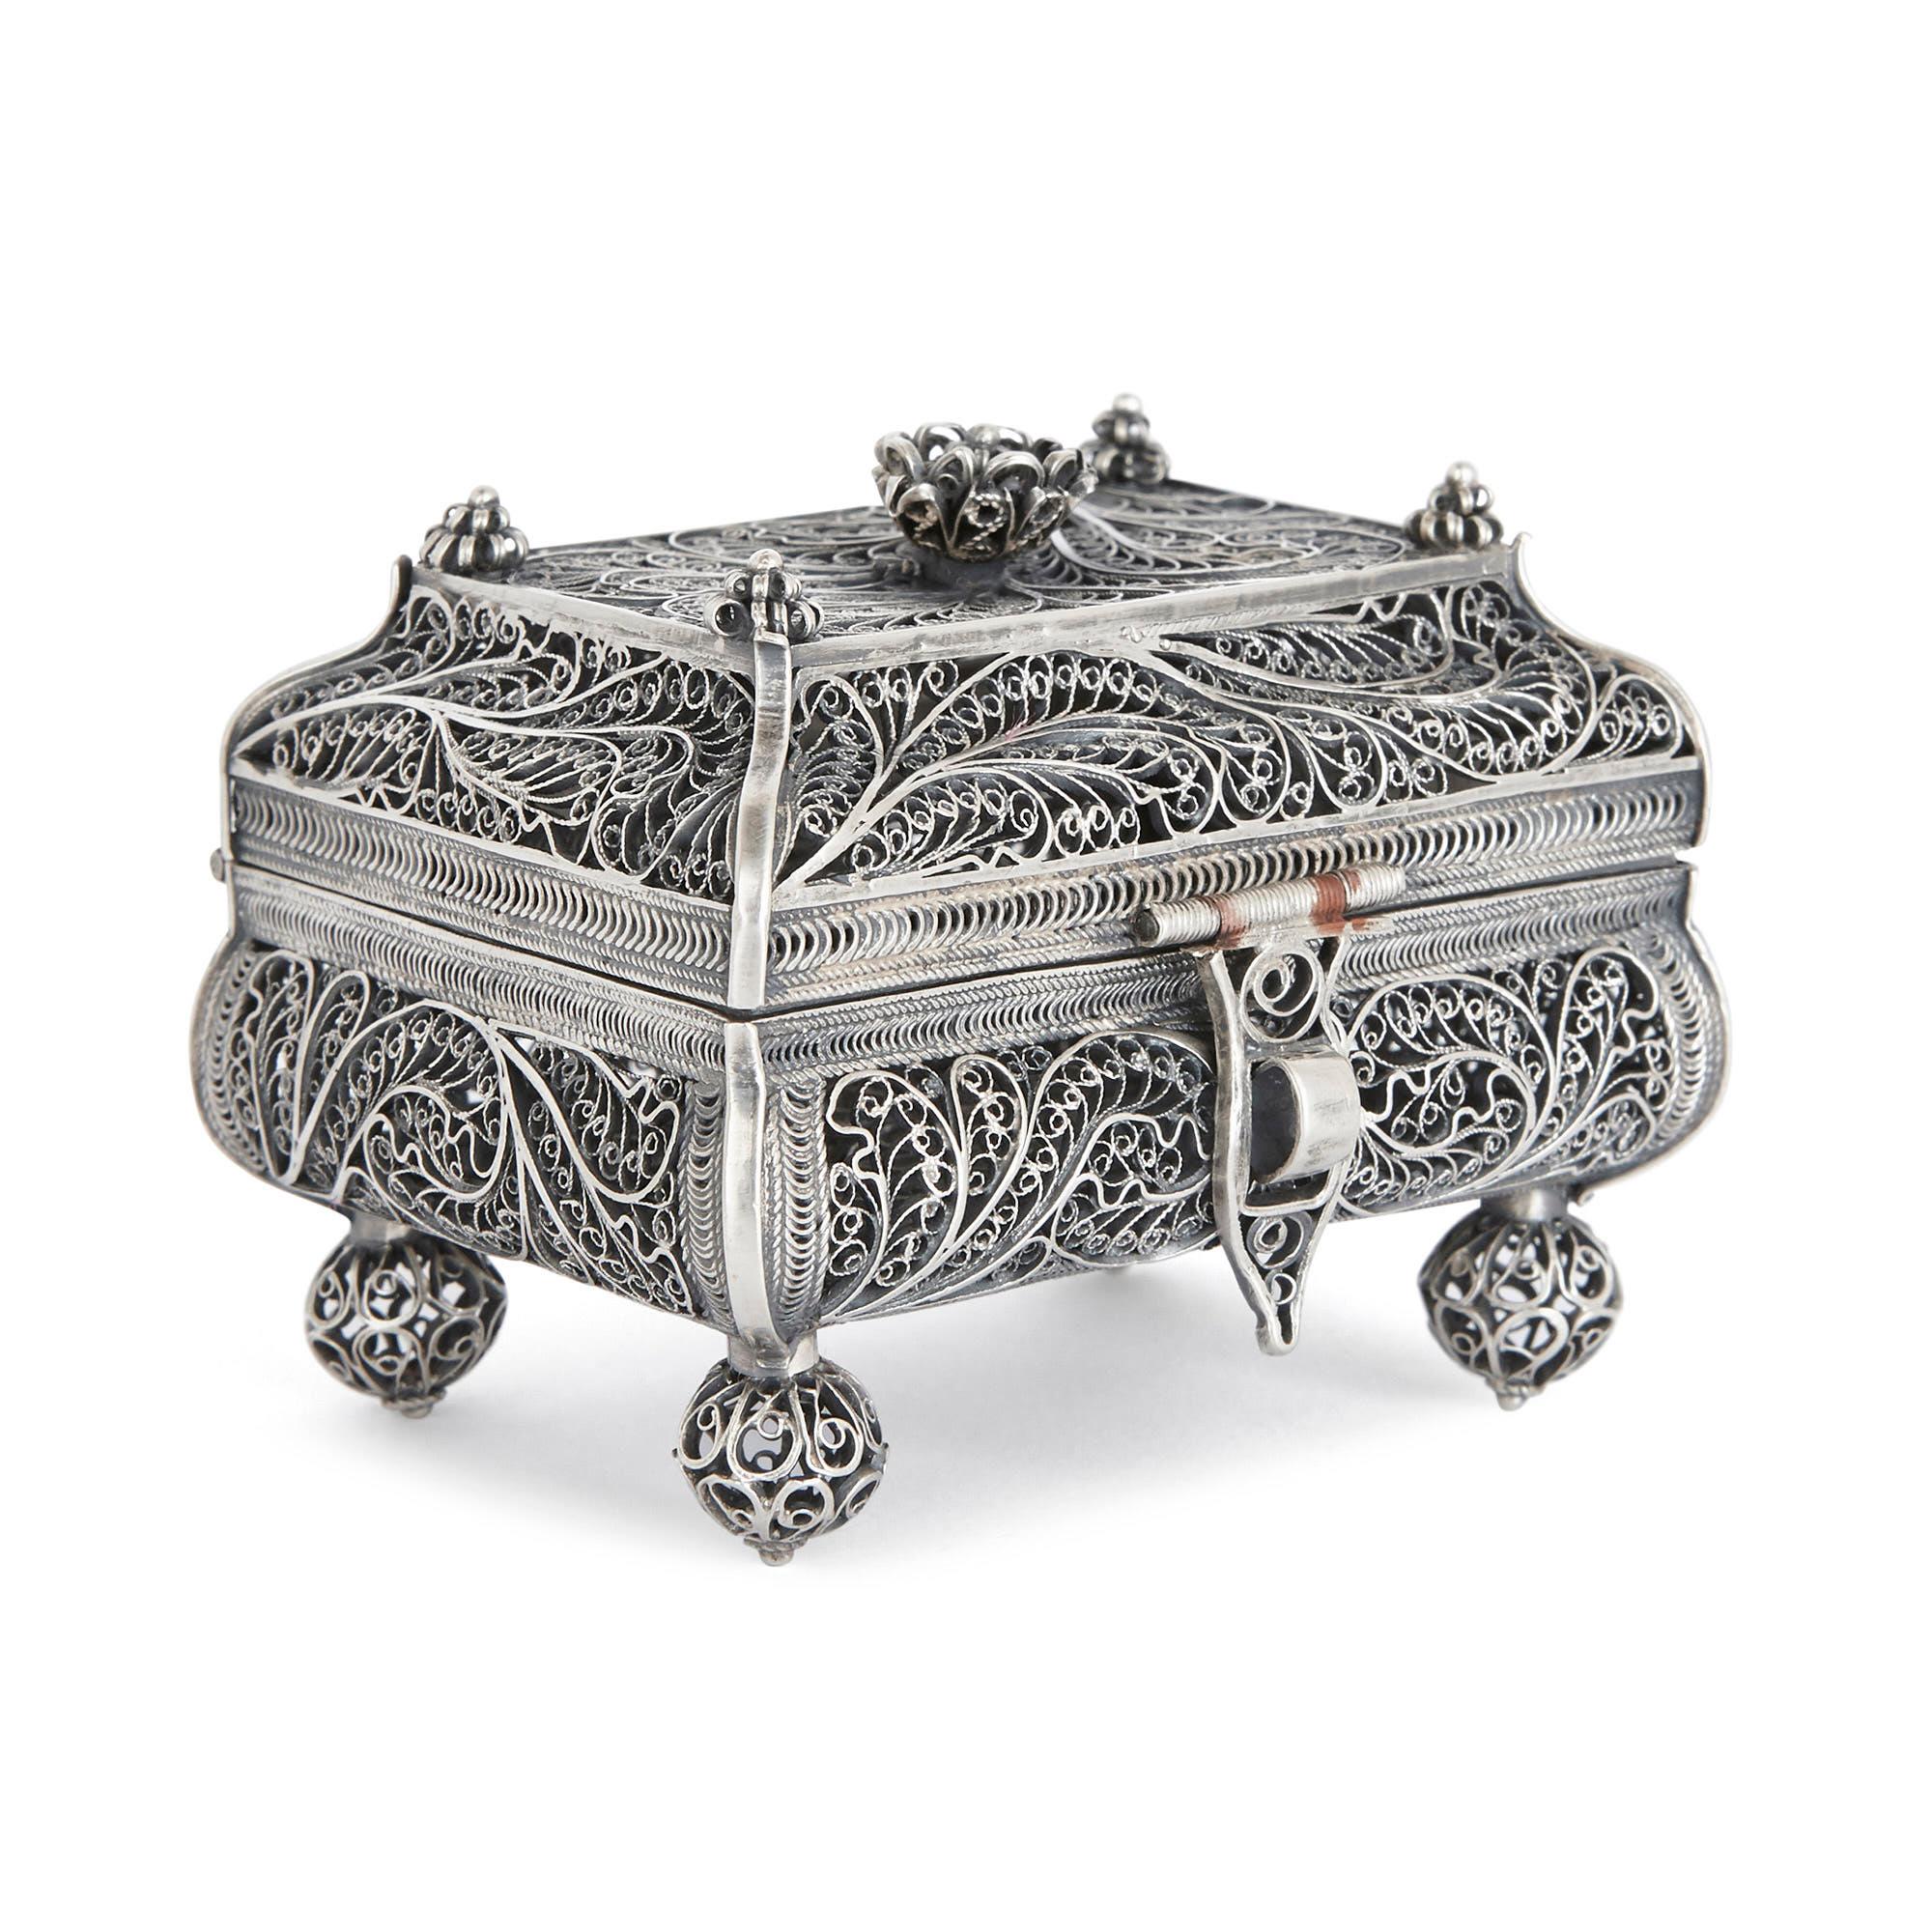 The silver box is set on four ball feet. Its body is of rectangular form, with curved edges, and it is covered by a shaped lid with a flat top. The lid is shut by a decorative clasp. Its top corners are decorated with small flower finials, and its